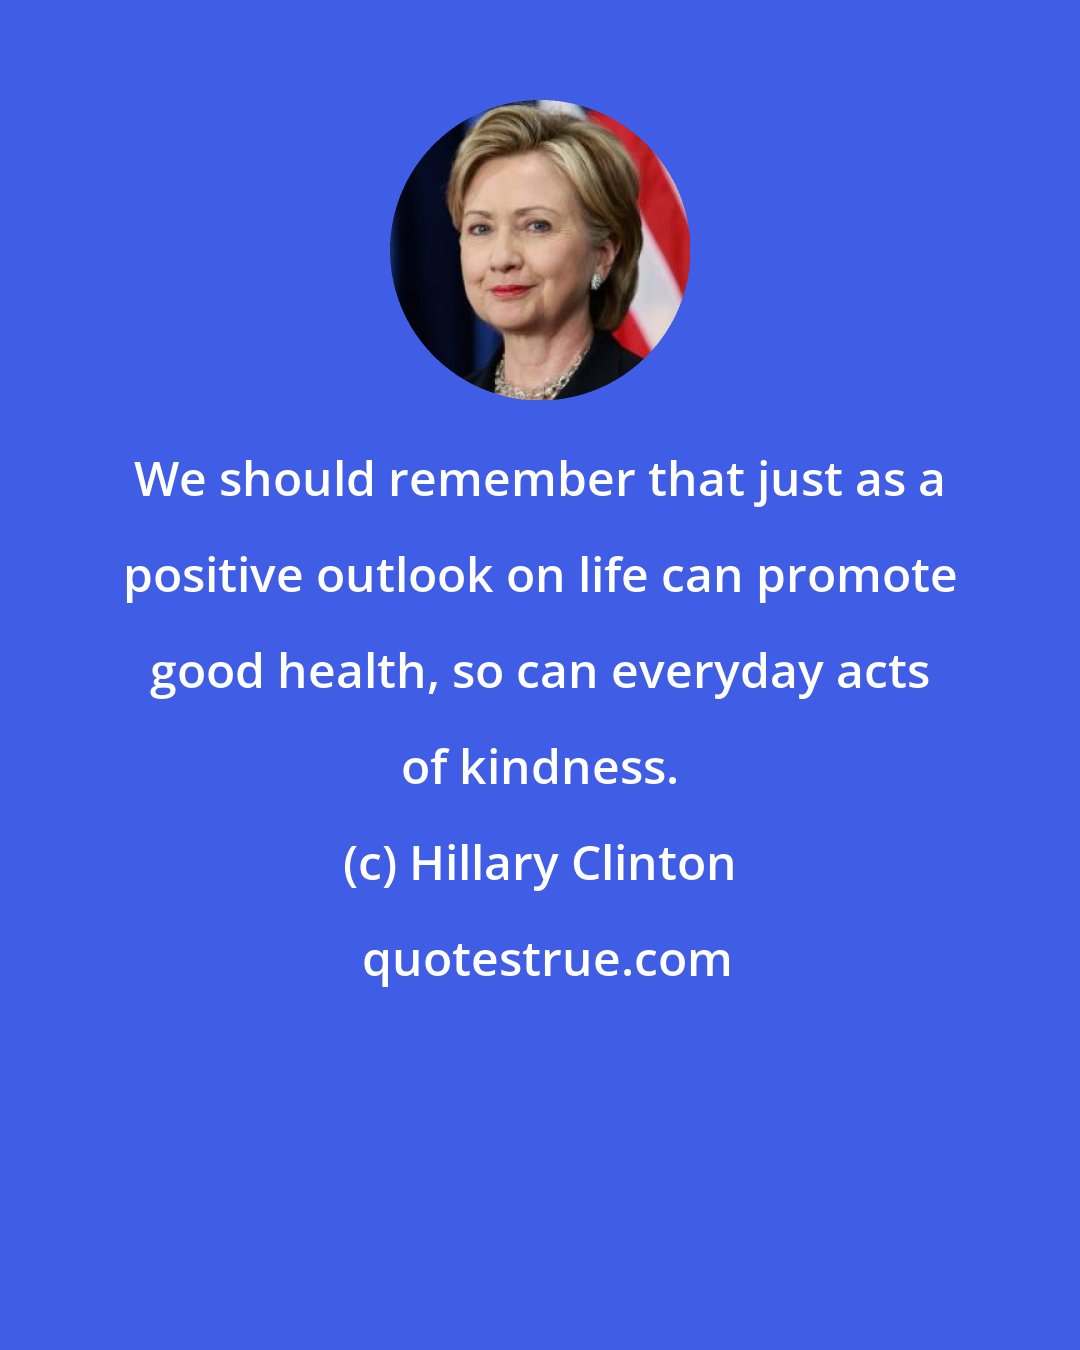 Hillary Clinton: We should remember that just as a positive outlook on life can promote good health, so can everyday acts of kindness.